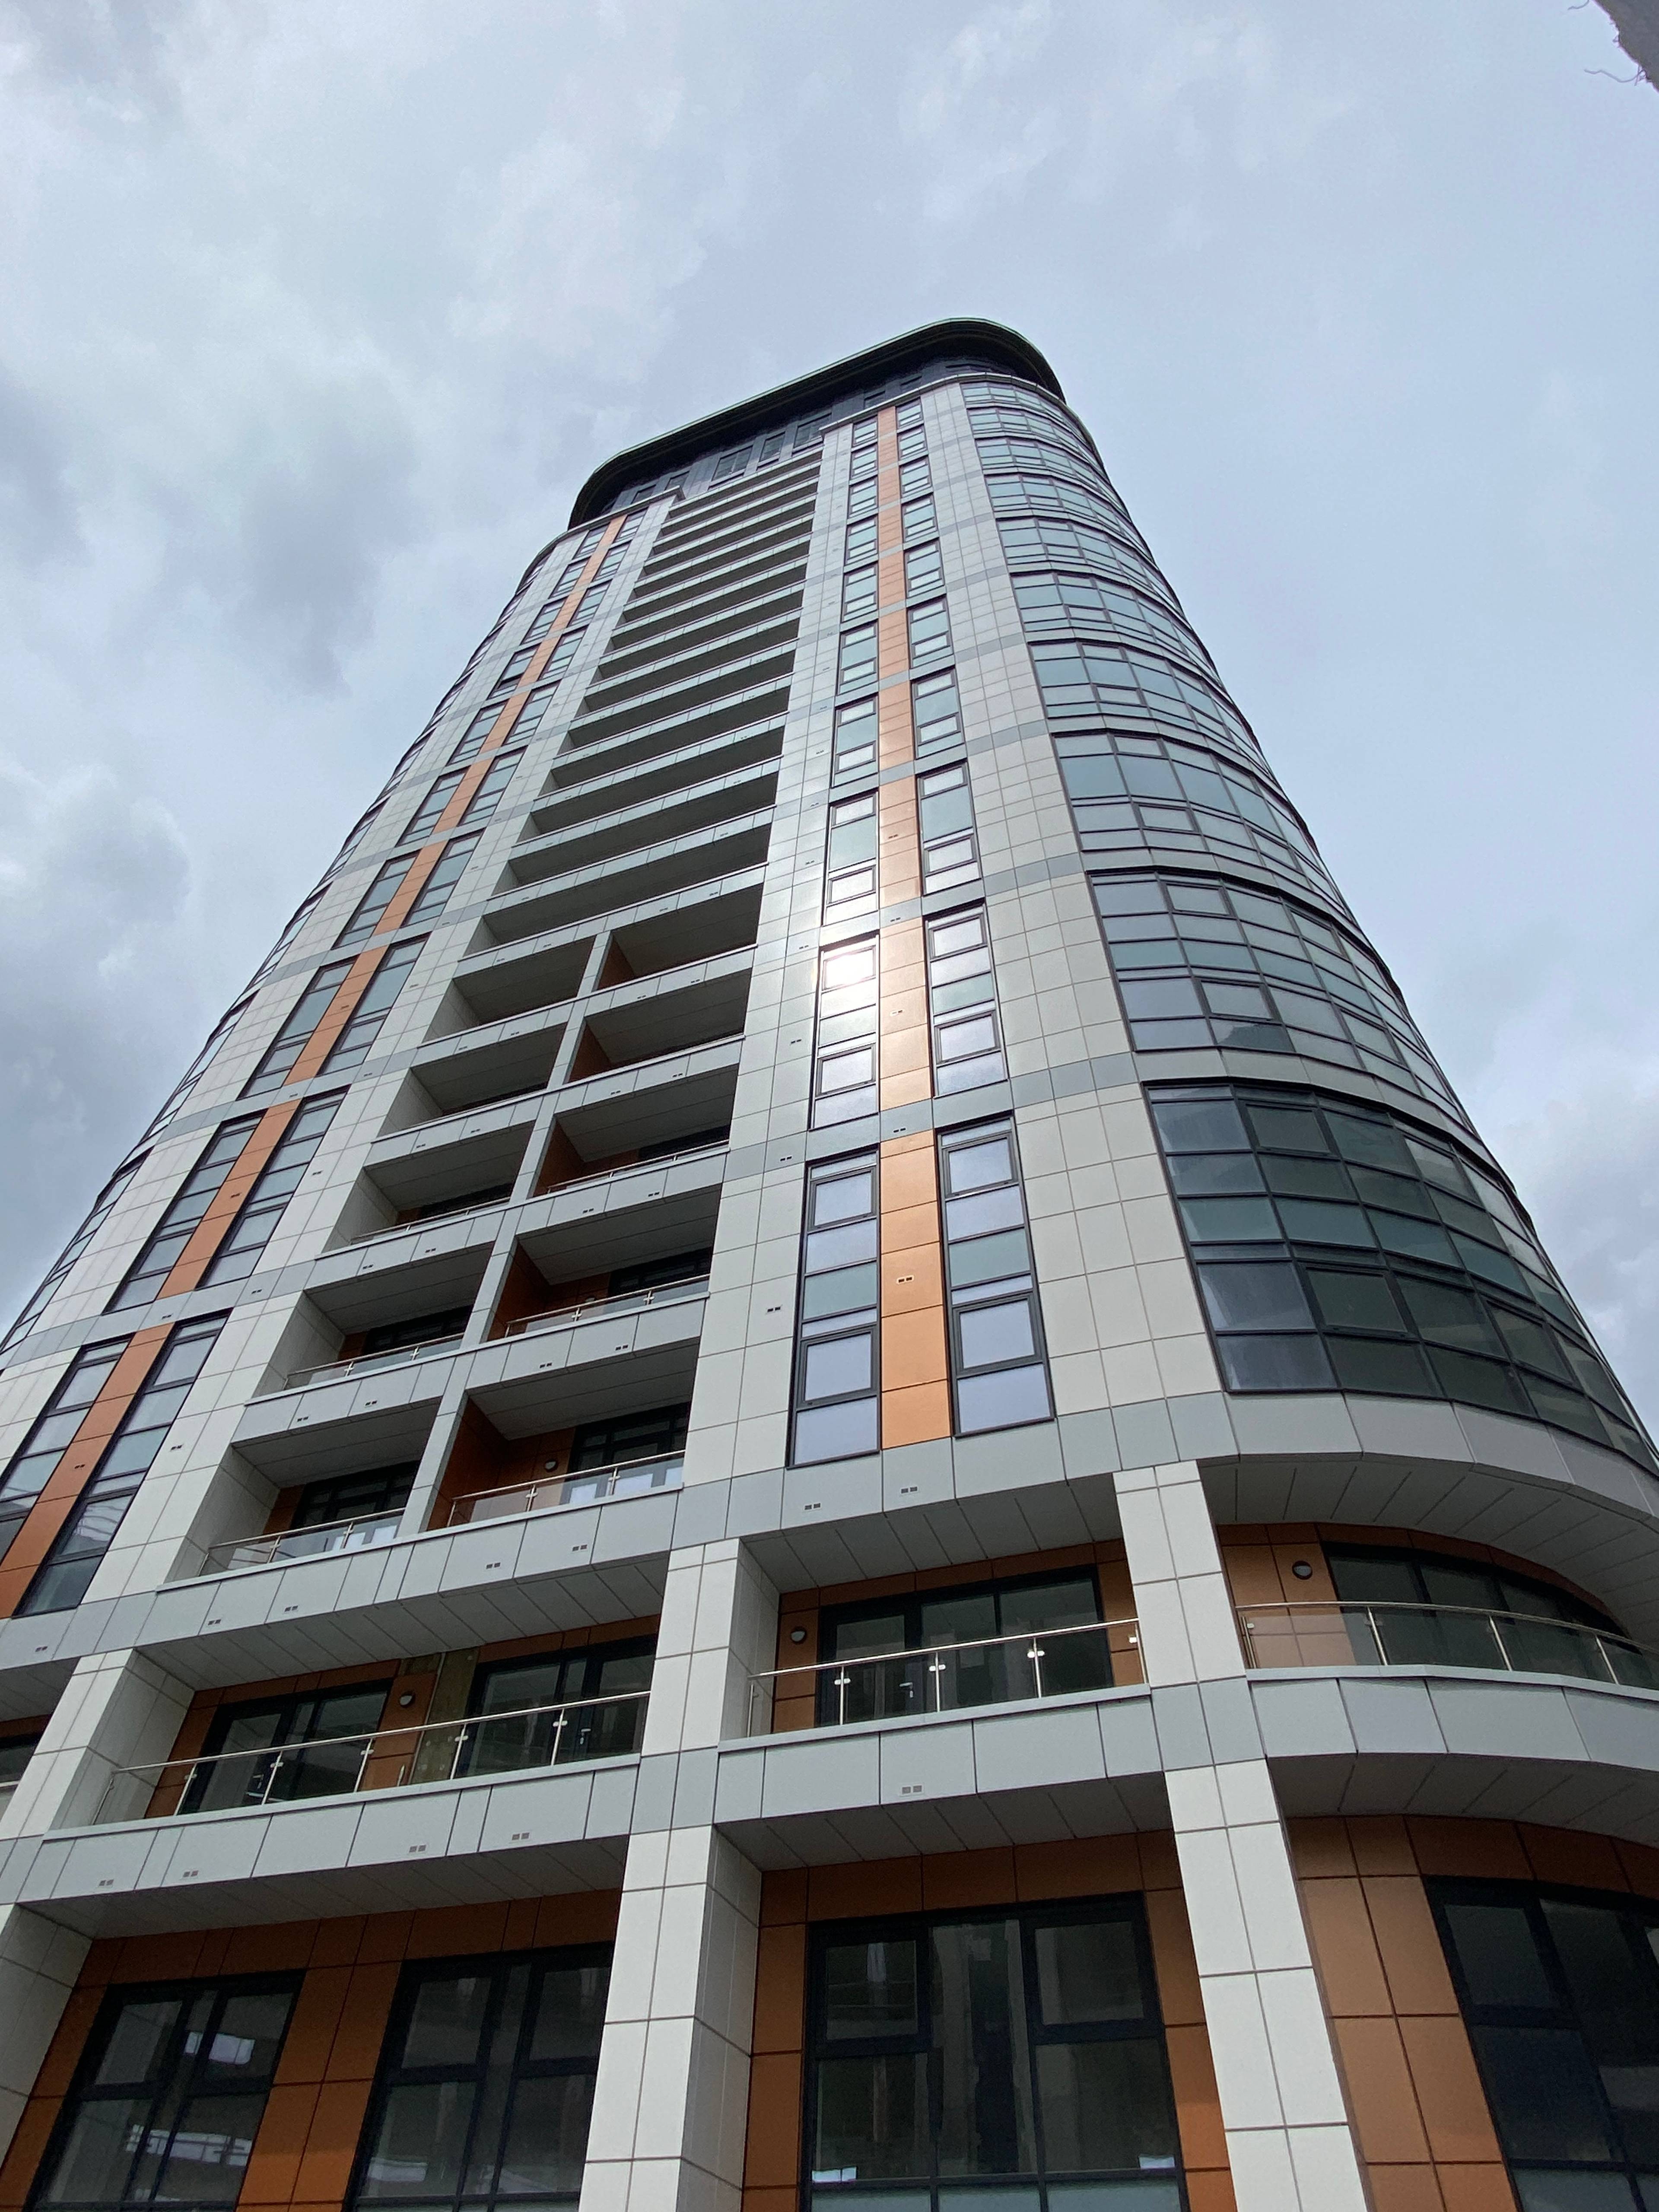 Northill Apartments, Salford Quays, Manchester, M50